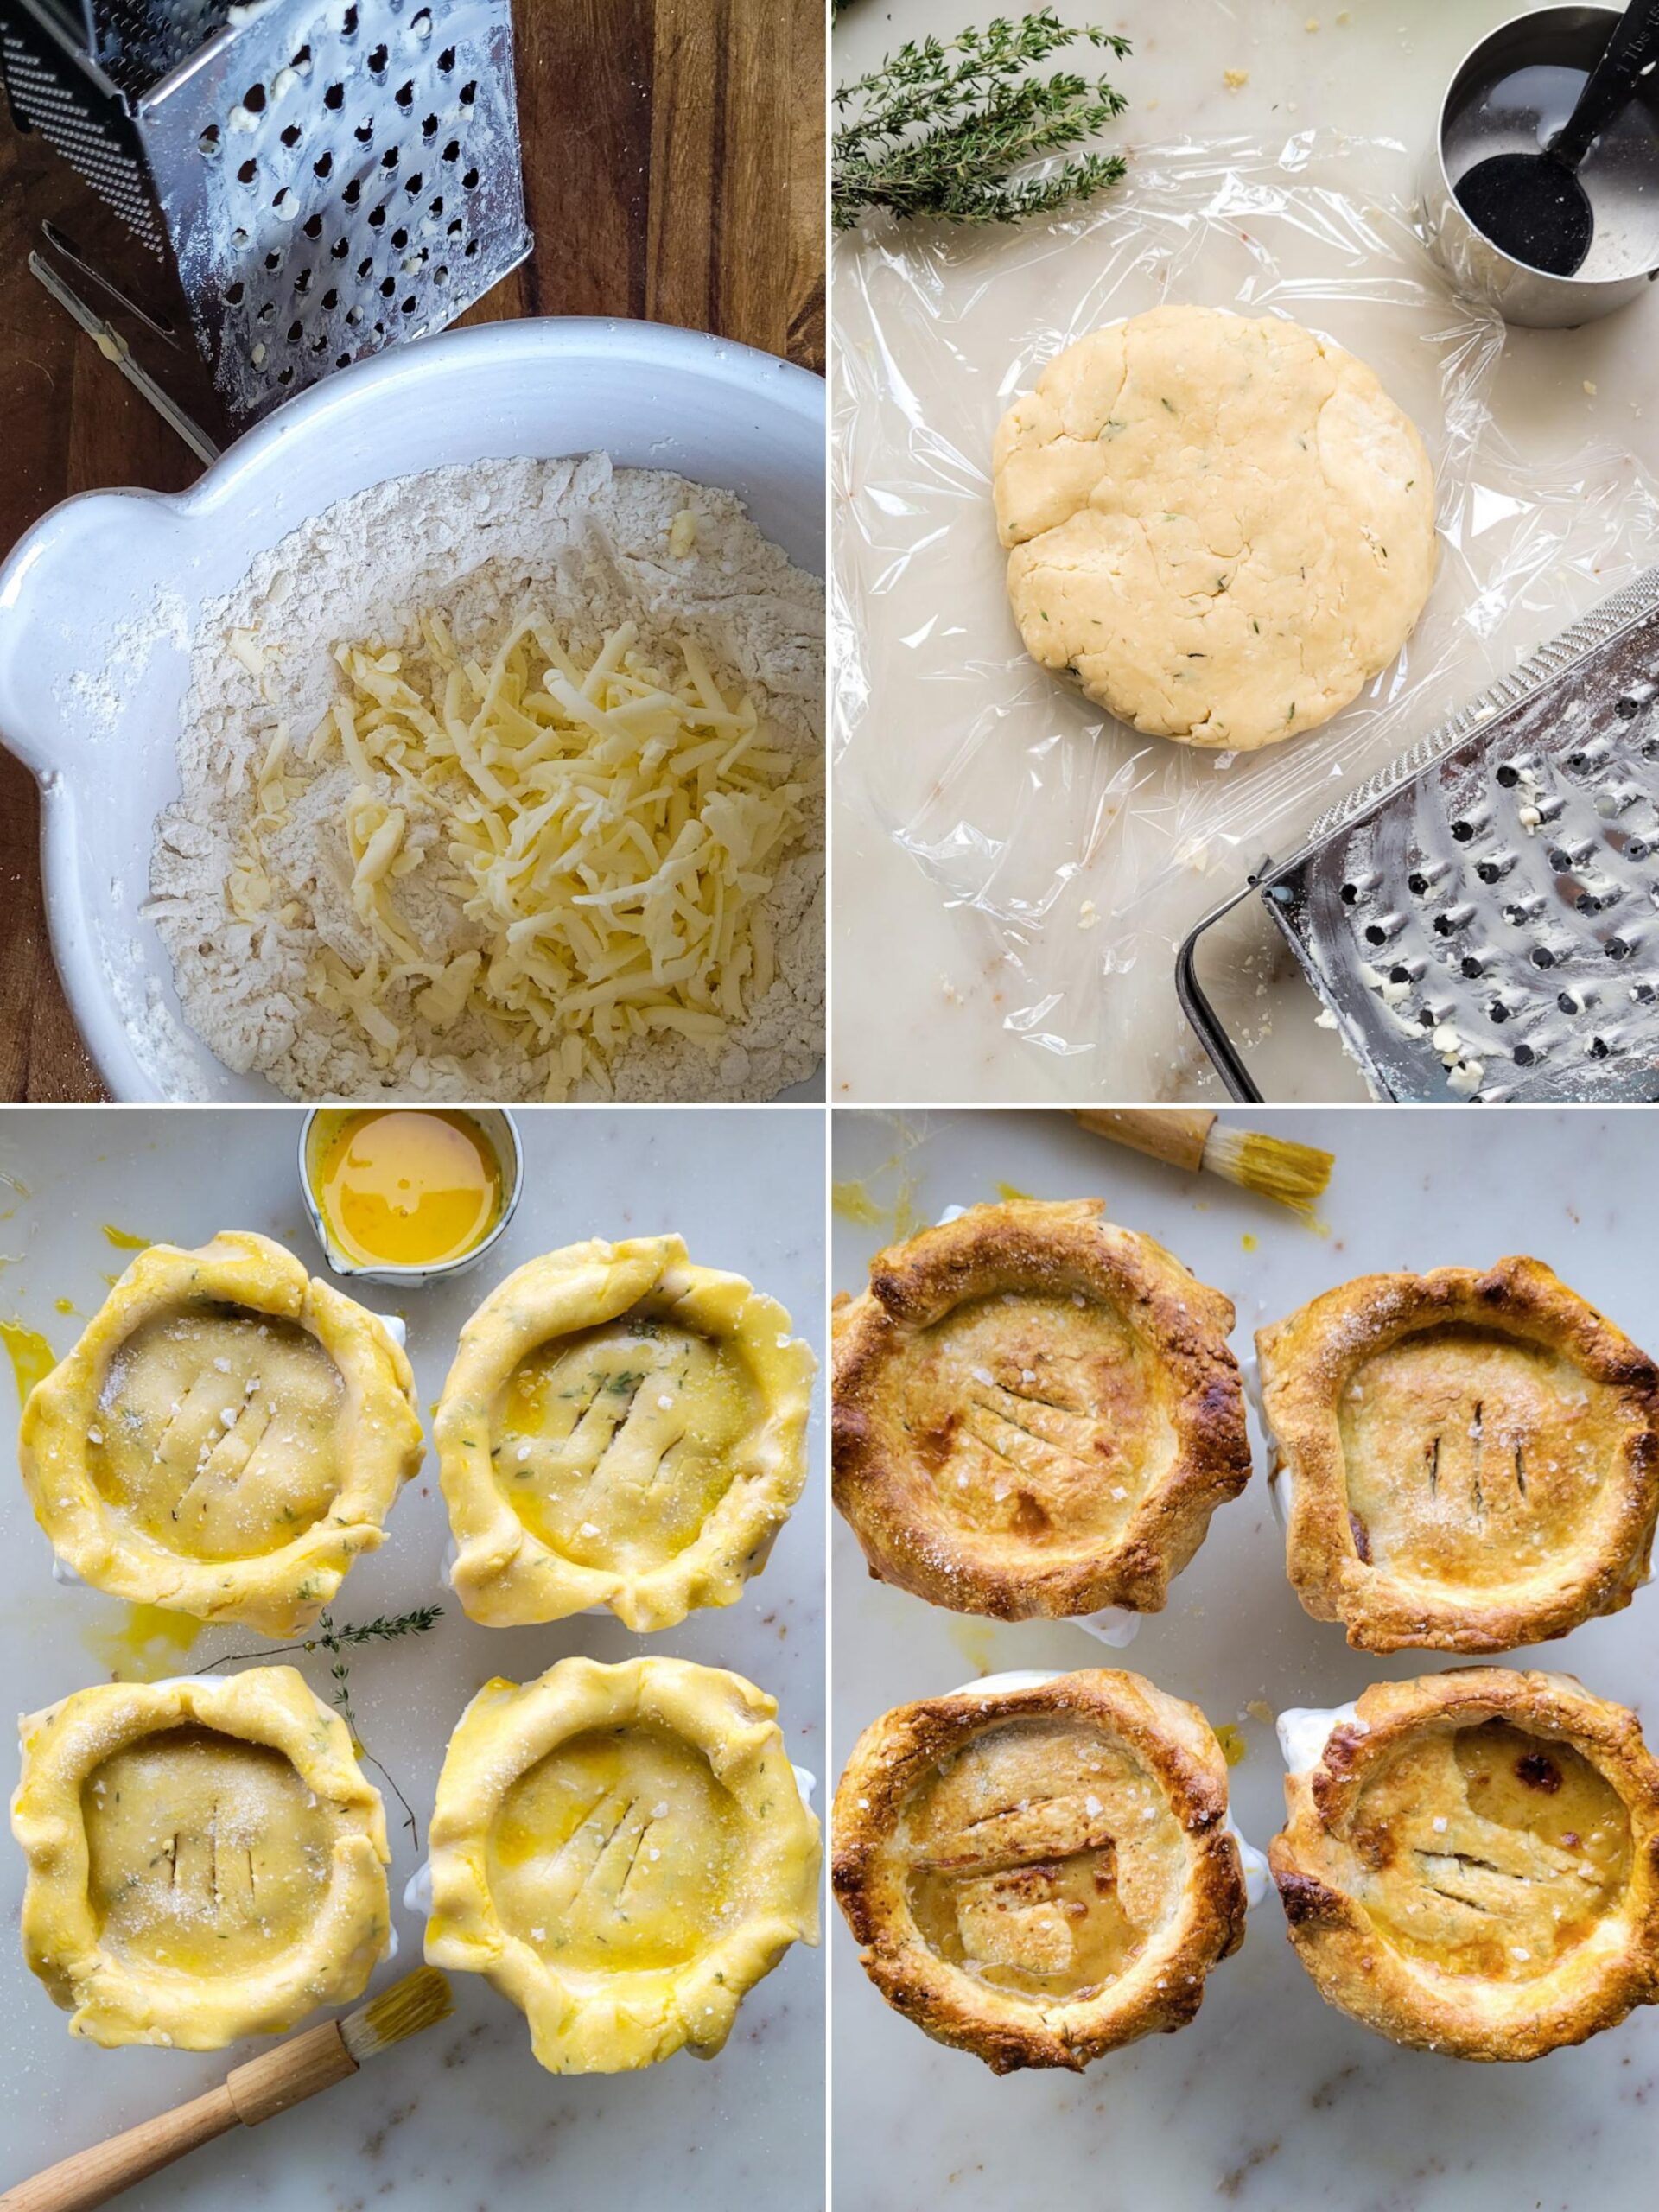 Collage showing the making of the shortcrust pastry for the Sage and Cider Turkey Pot Pies.